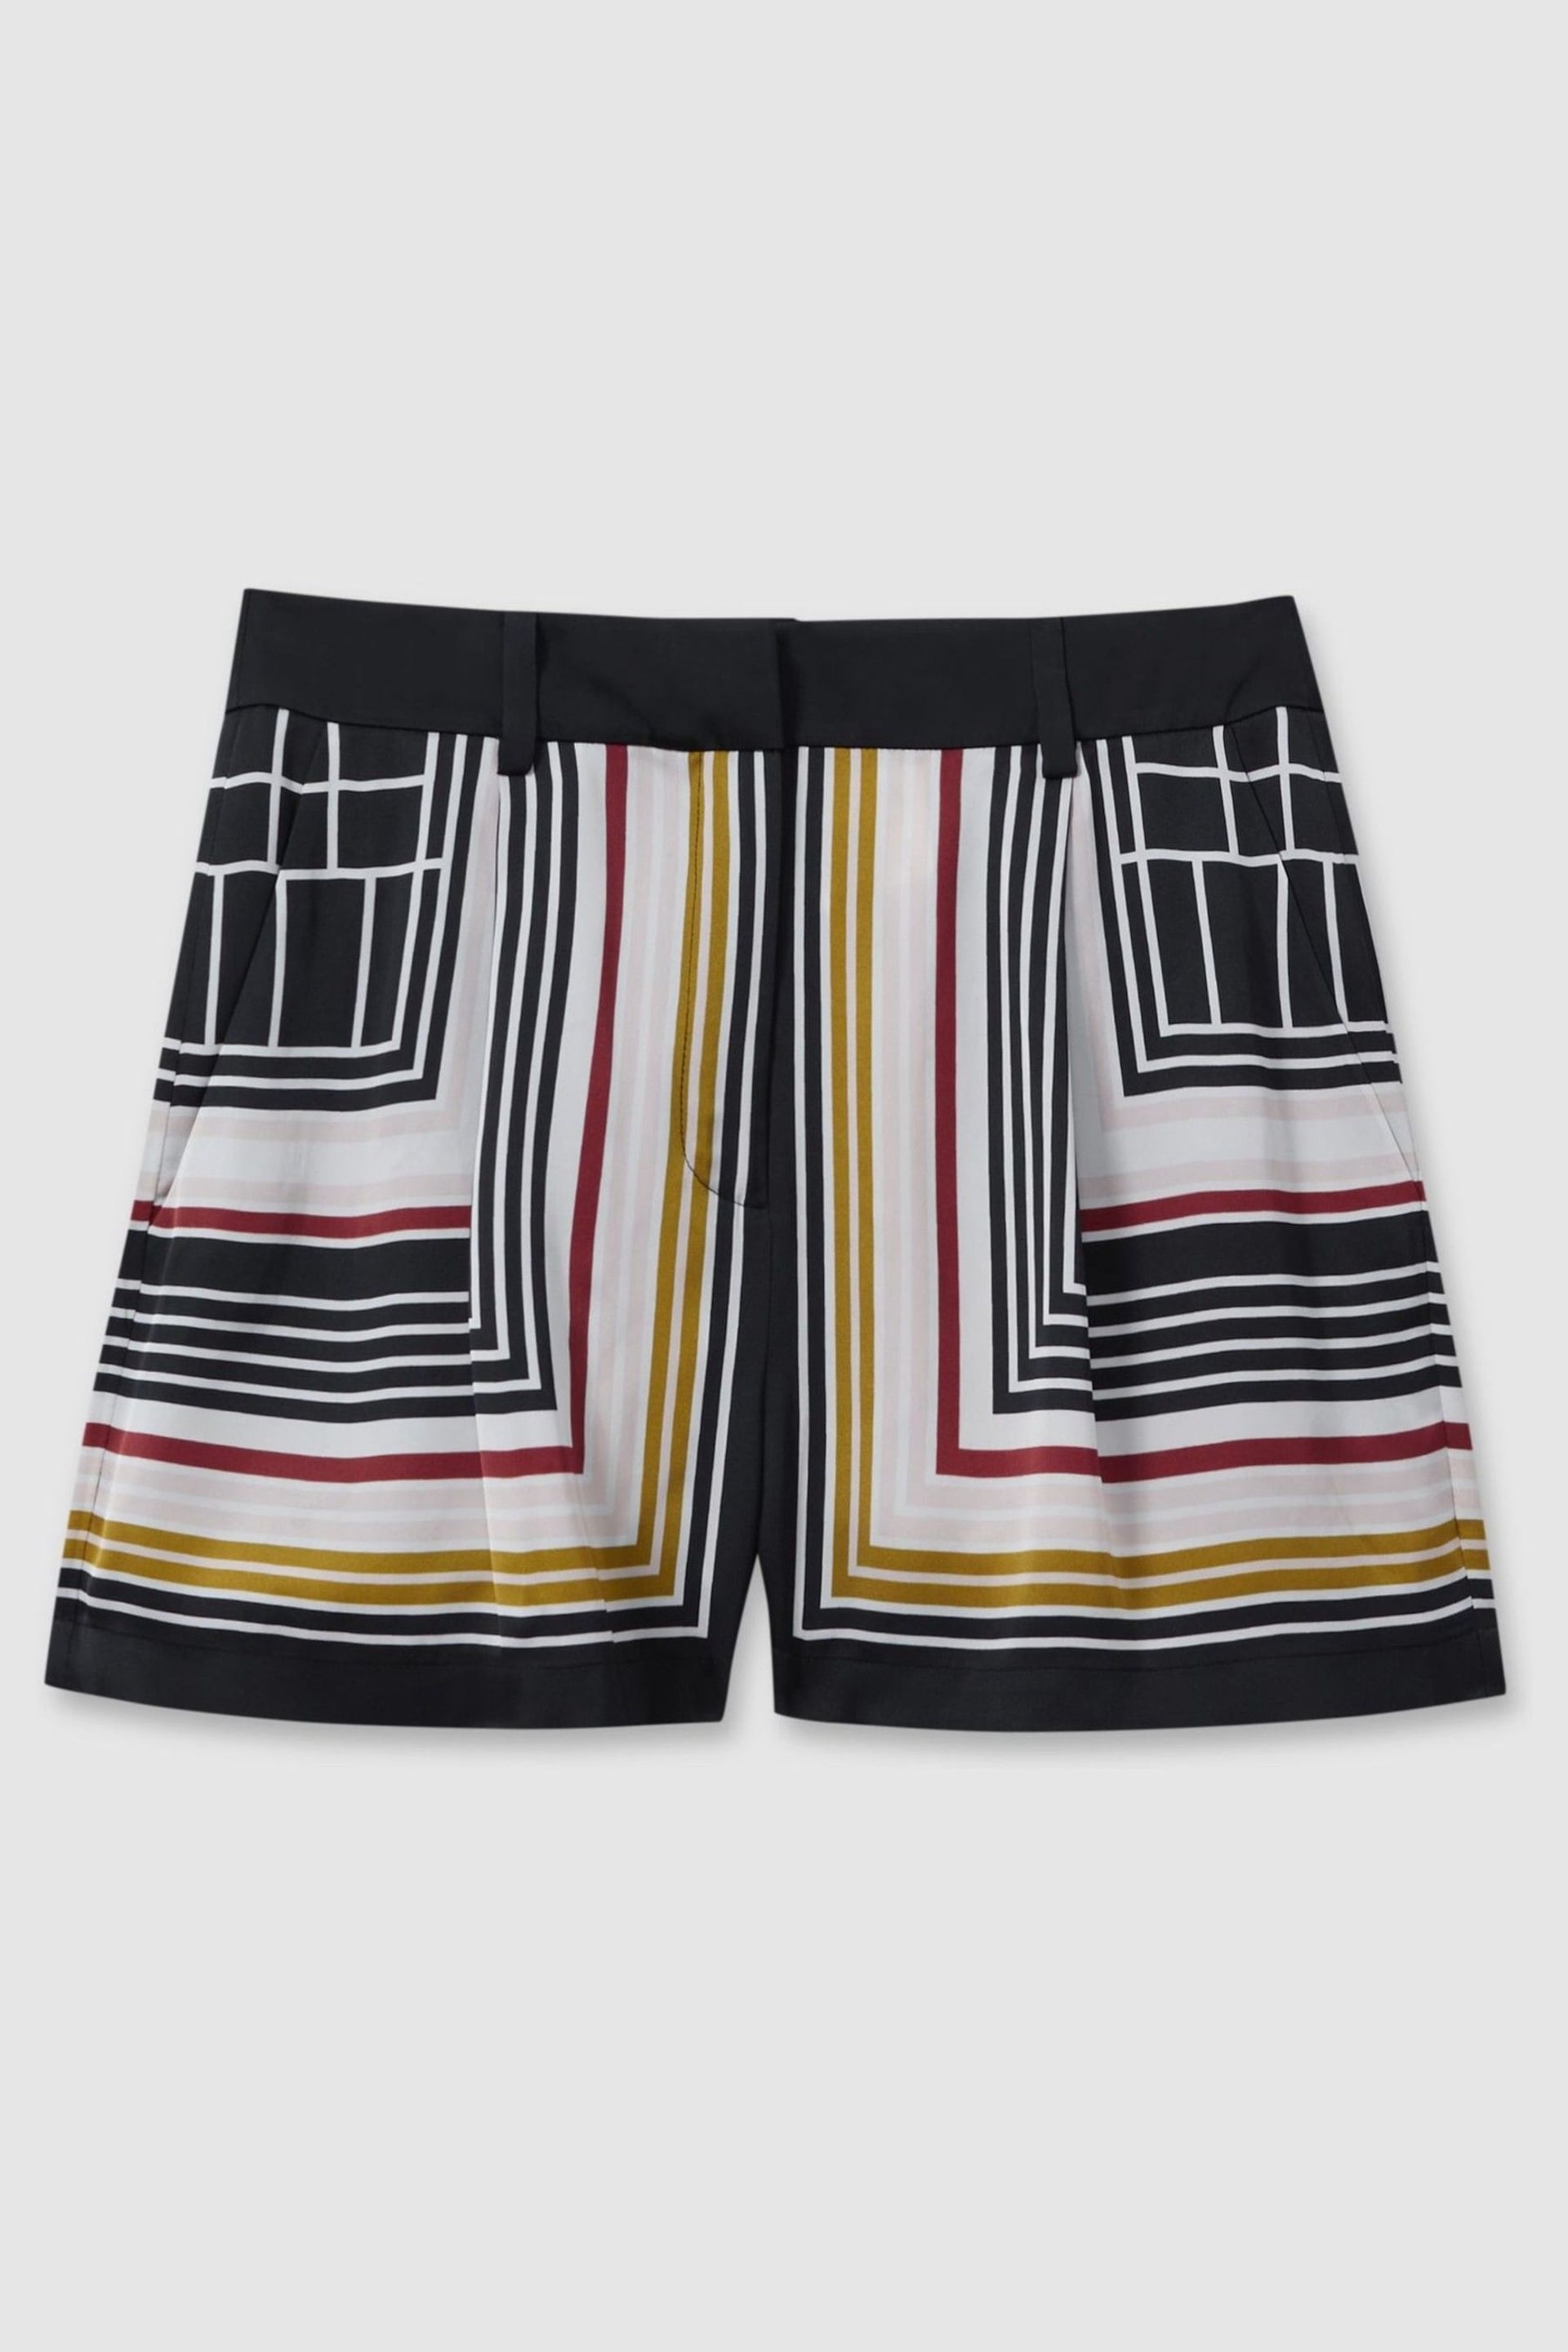 Reiss Navy Print Lilly Satin Striped Shorts - Image 2 of 6